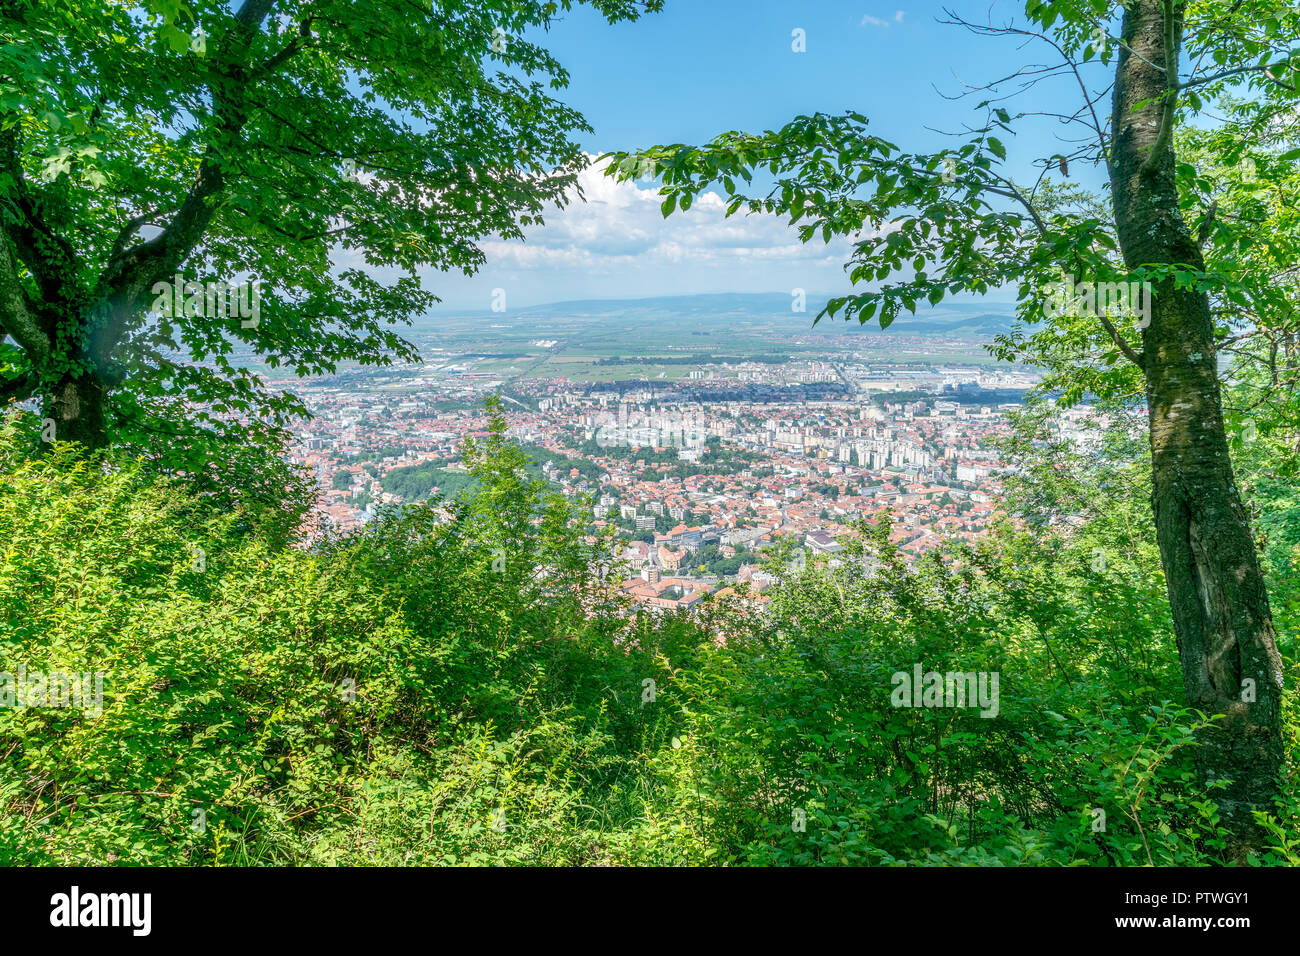 Overview of Brasov City viewed from Tampa Mountain, Brasov, Romania. Stock Photo